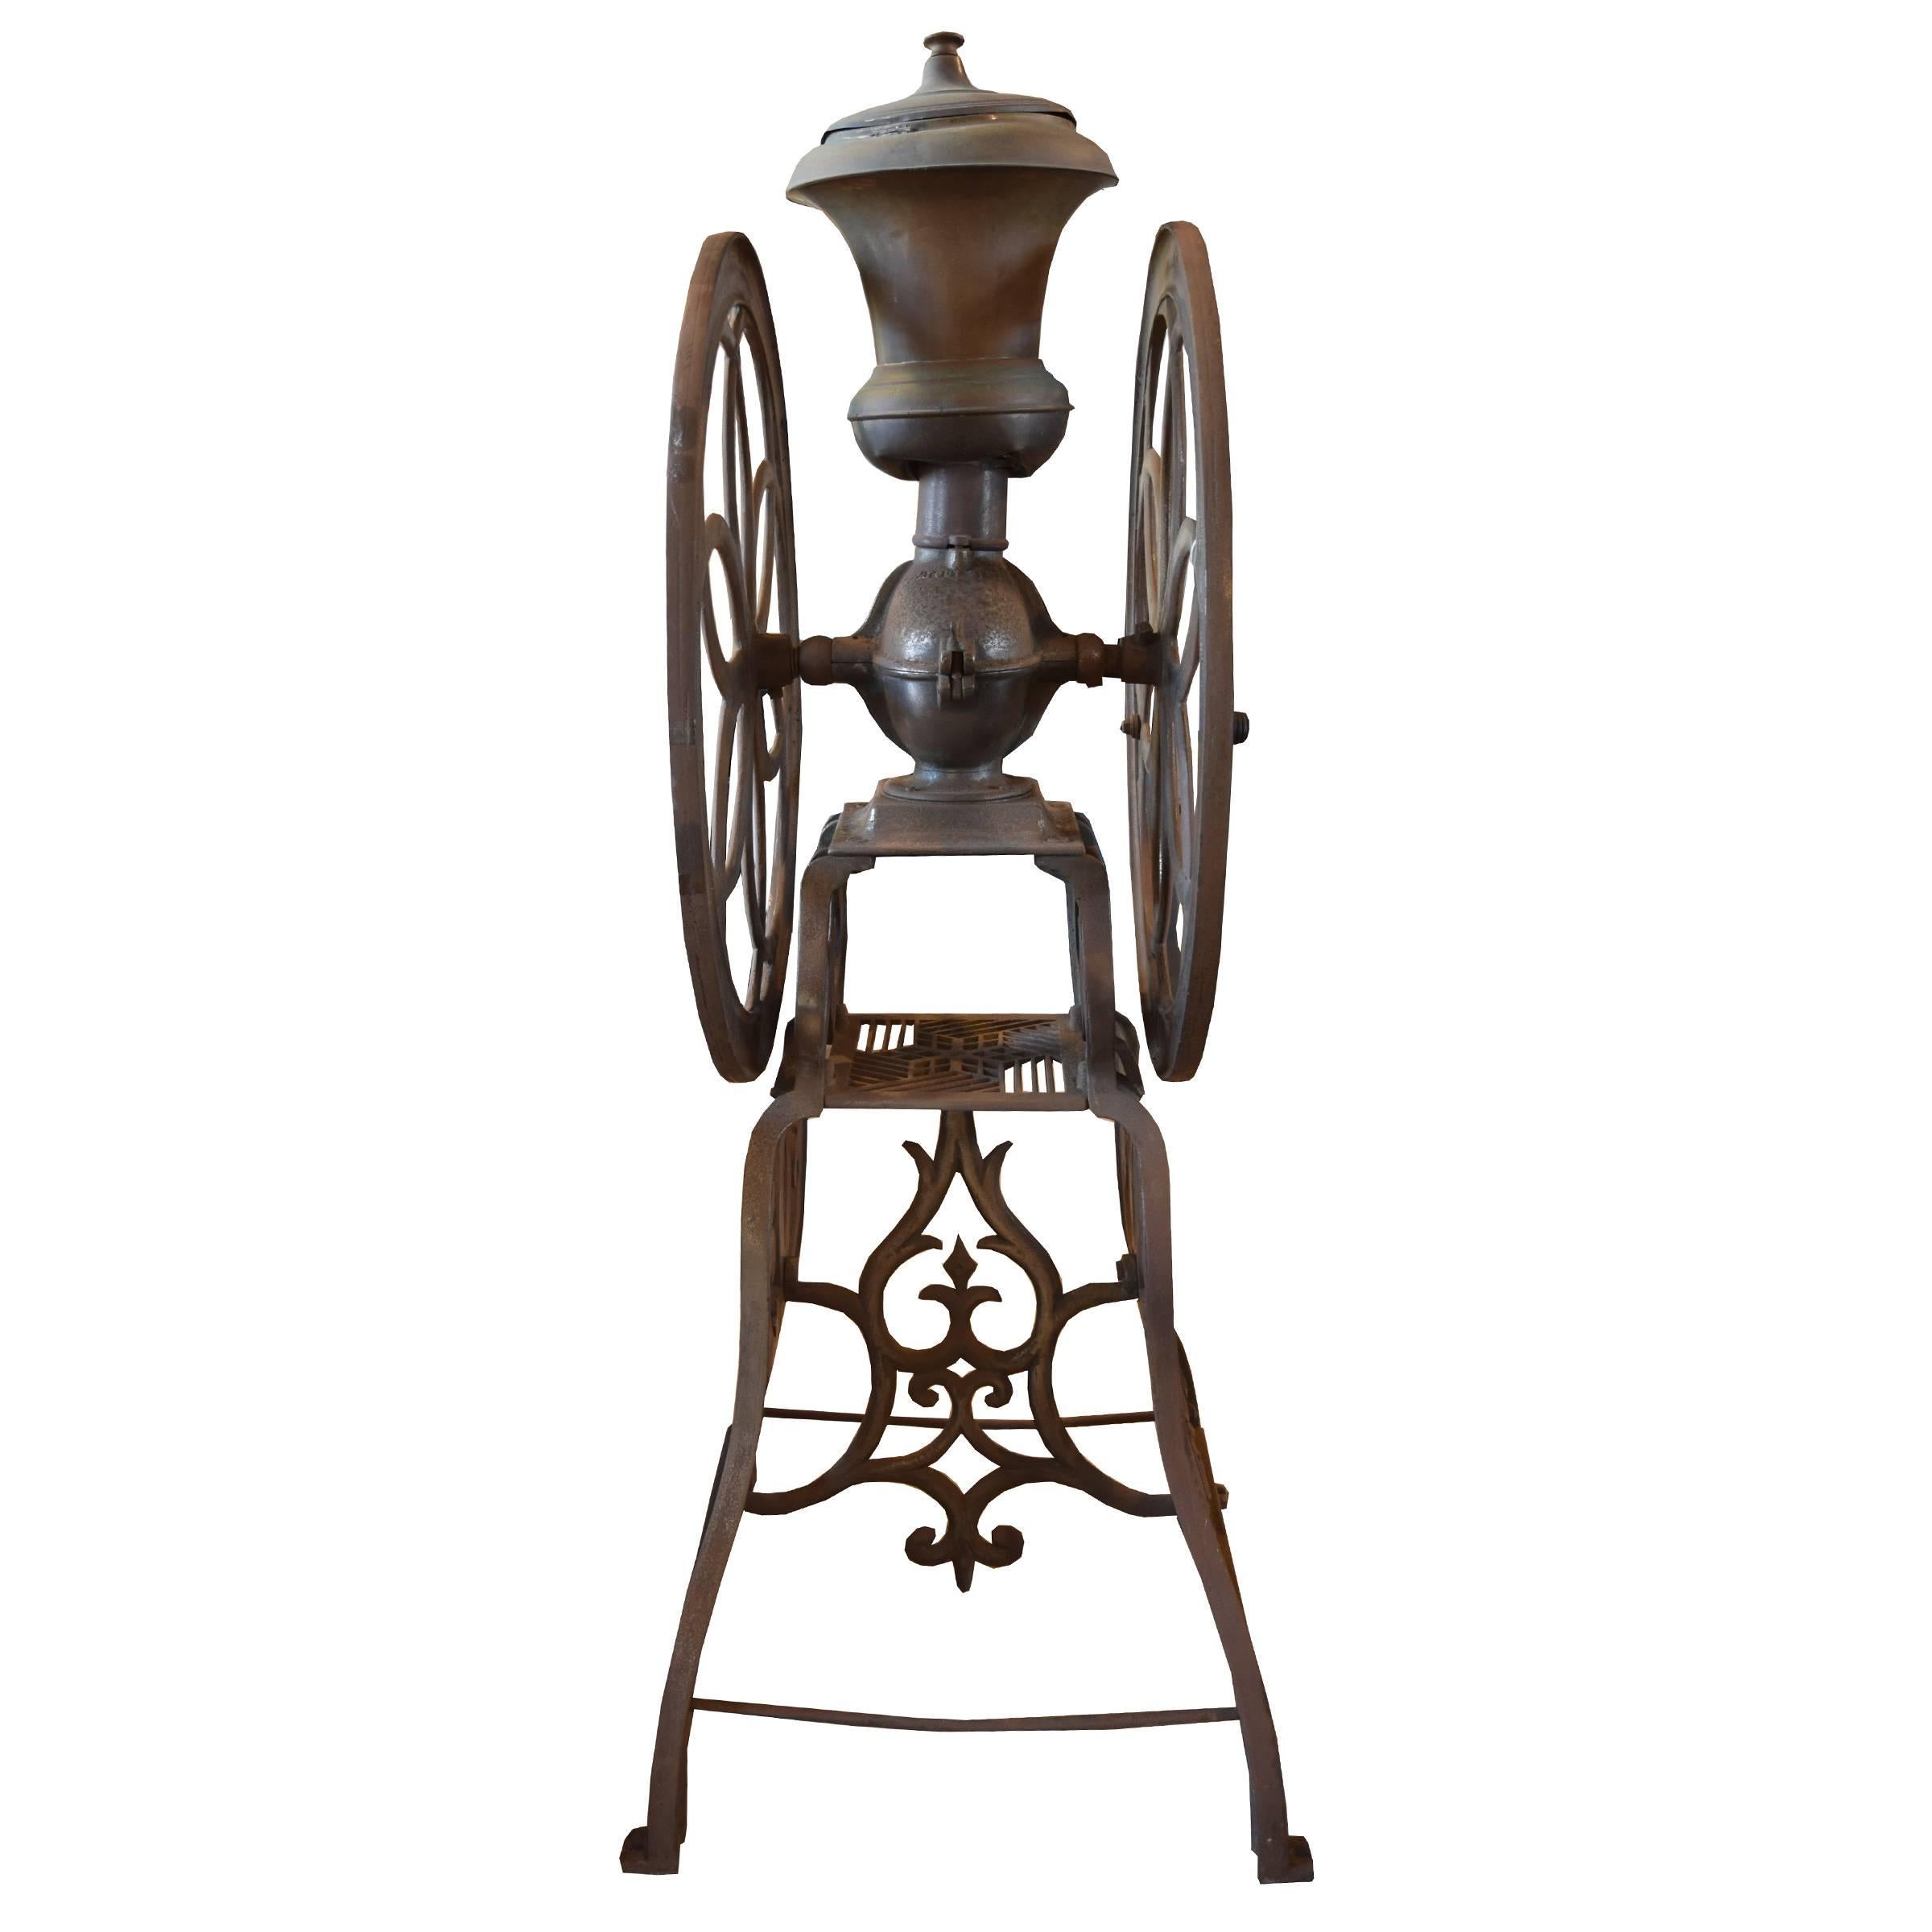 An American cast iron coffee grinder by Enterprise Manufacturing Co. of Philadelphia, Pennsylvania. This unit consists of a lidded funnel, crank wheel with wood handle, floor stand, and patent date marked 